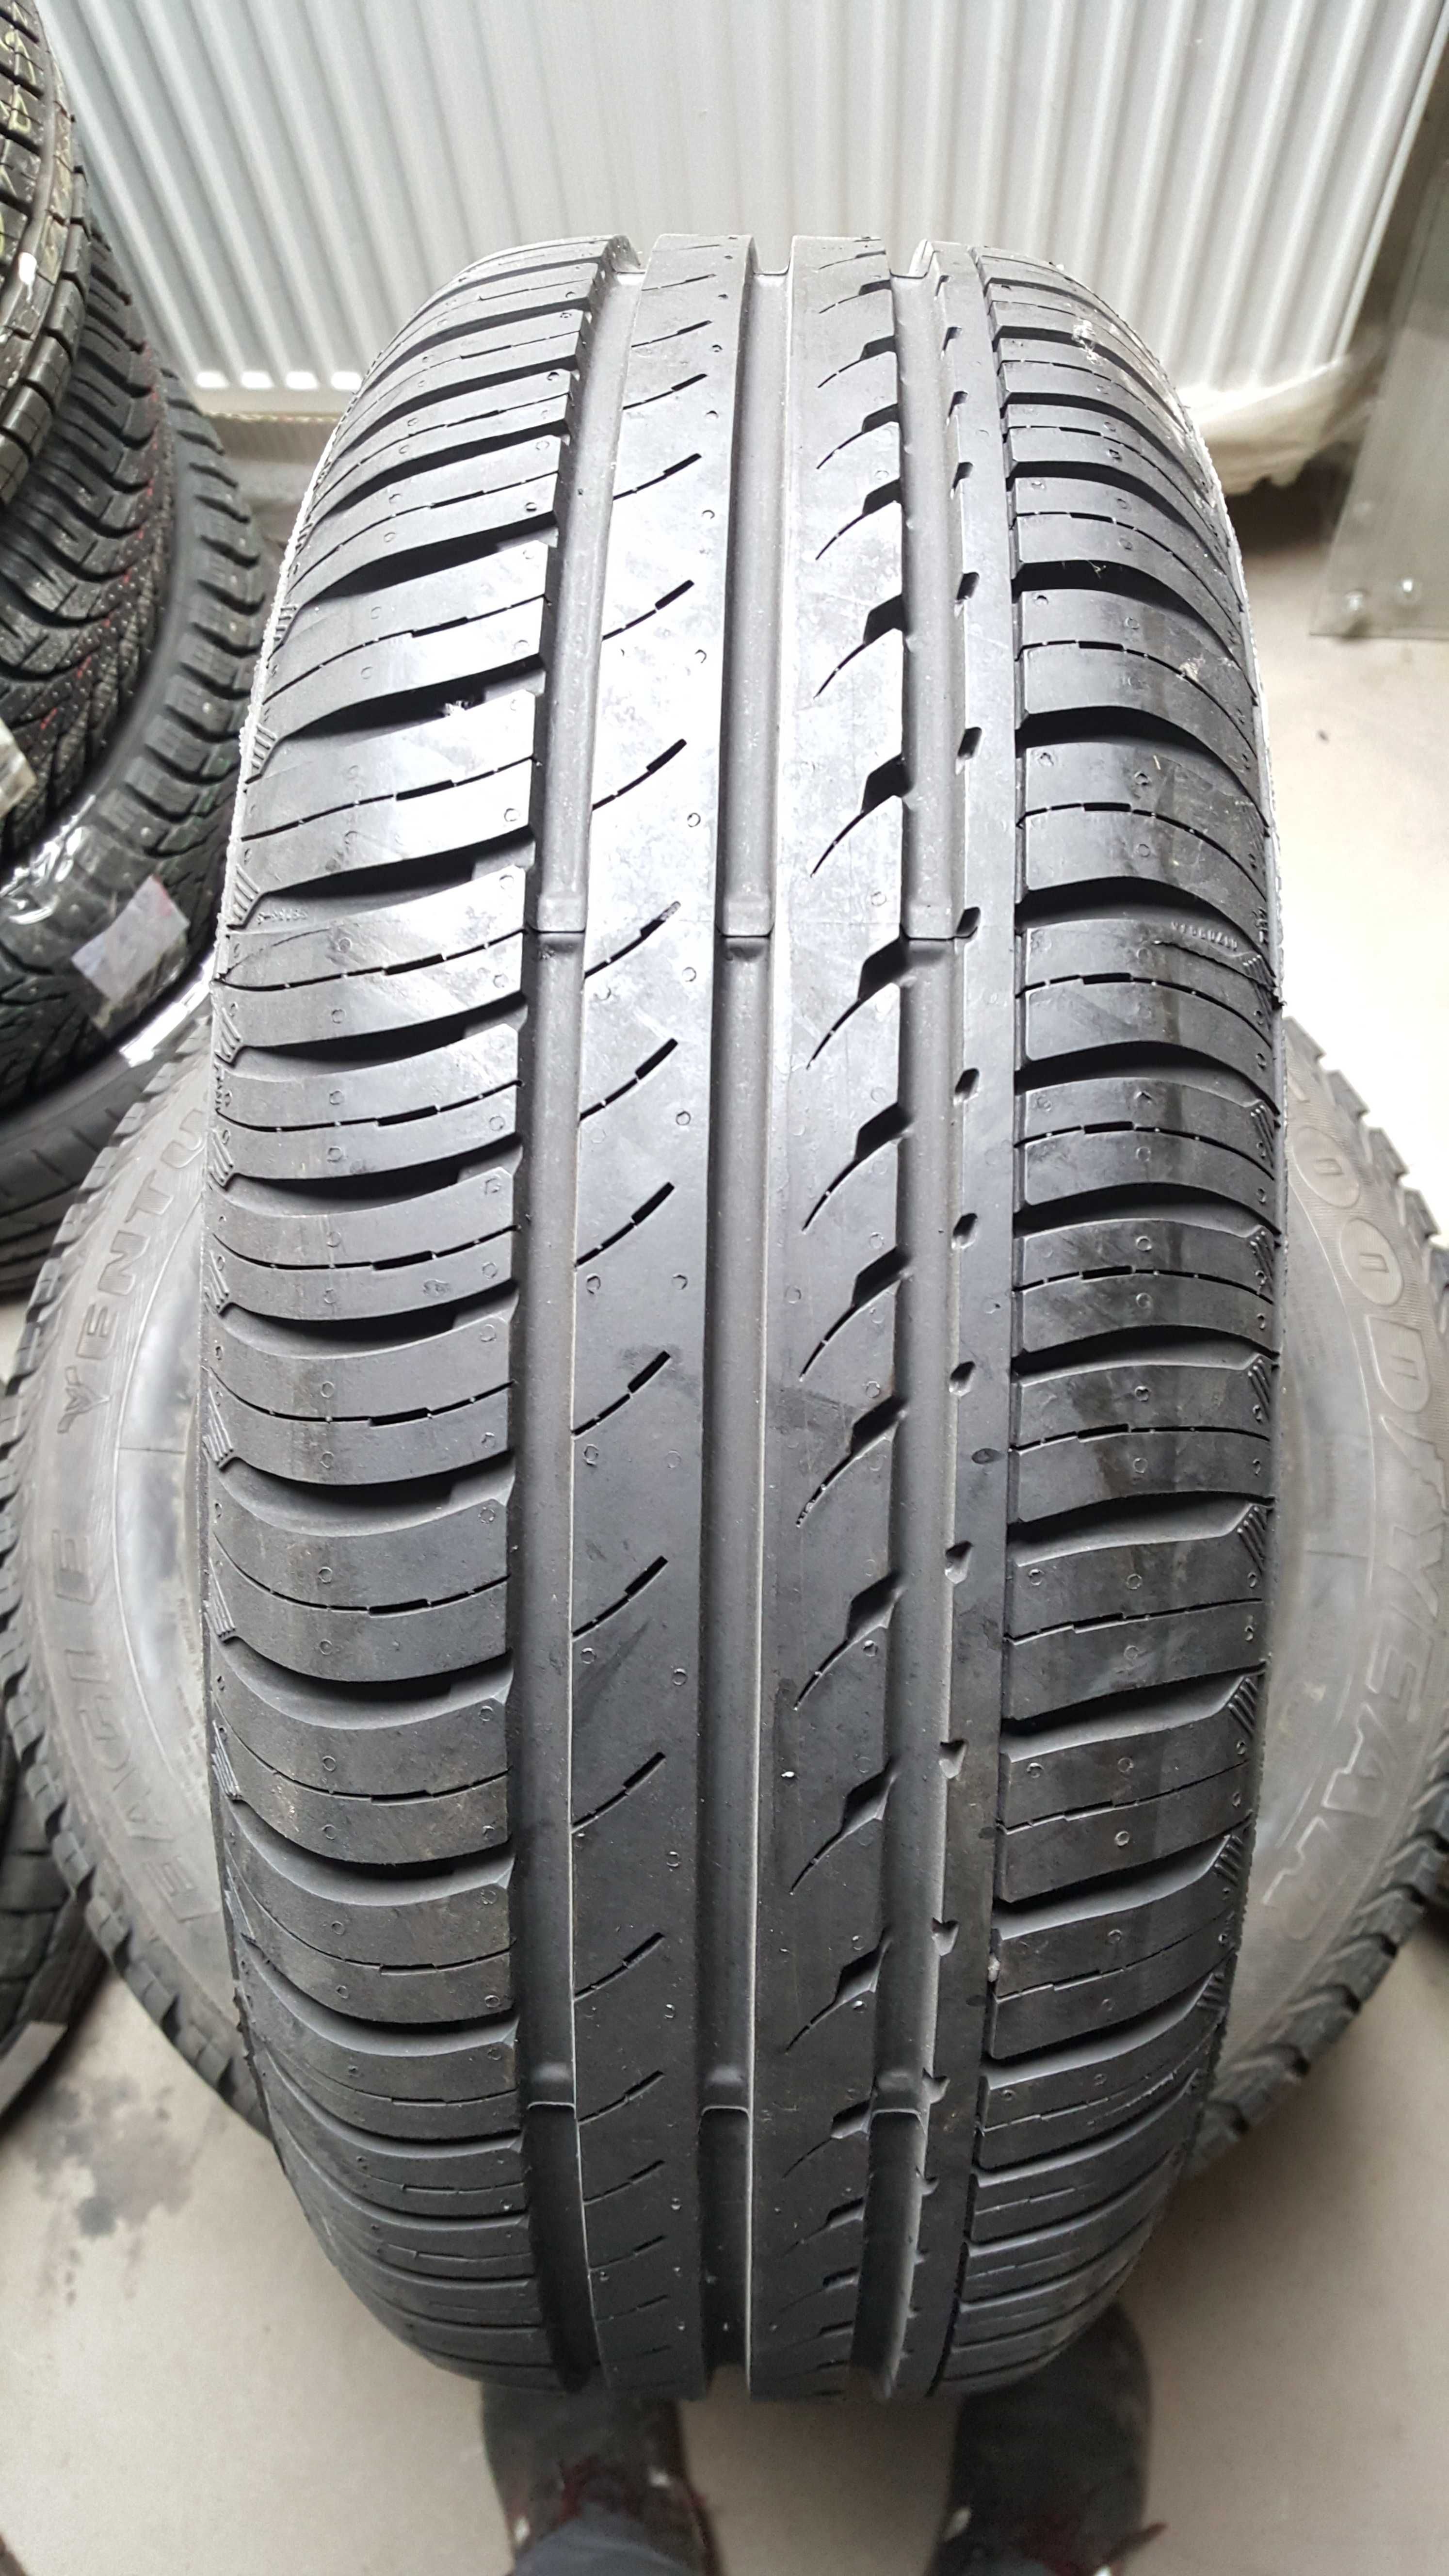 Continental 185/60 r14 ContiEcoContact 3 /// 8,15mm!!! NOWA